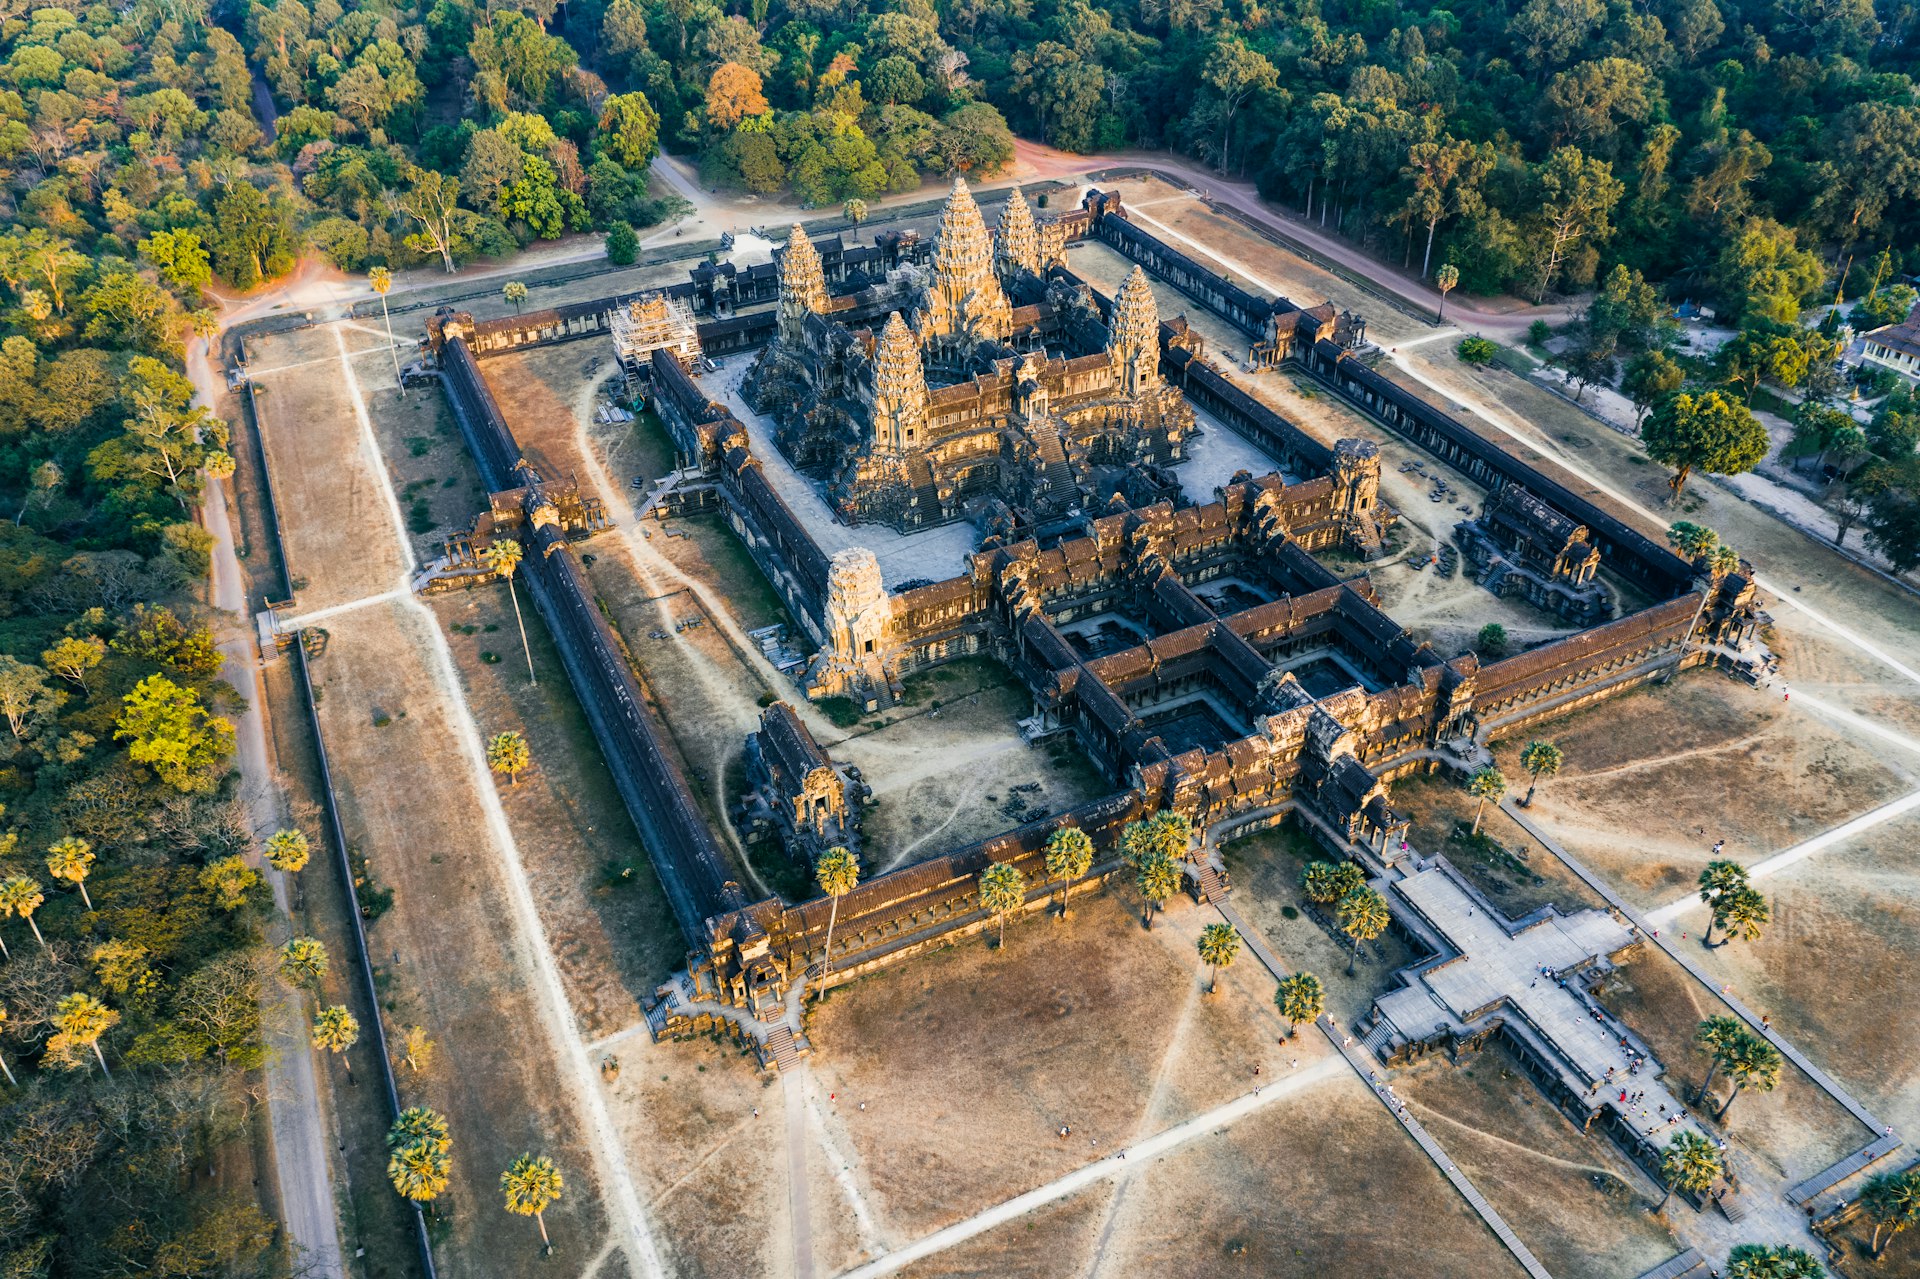 Aerial view of Angkor Wat temple at sunset, Siem Reap, Cambodia